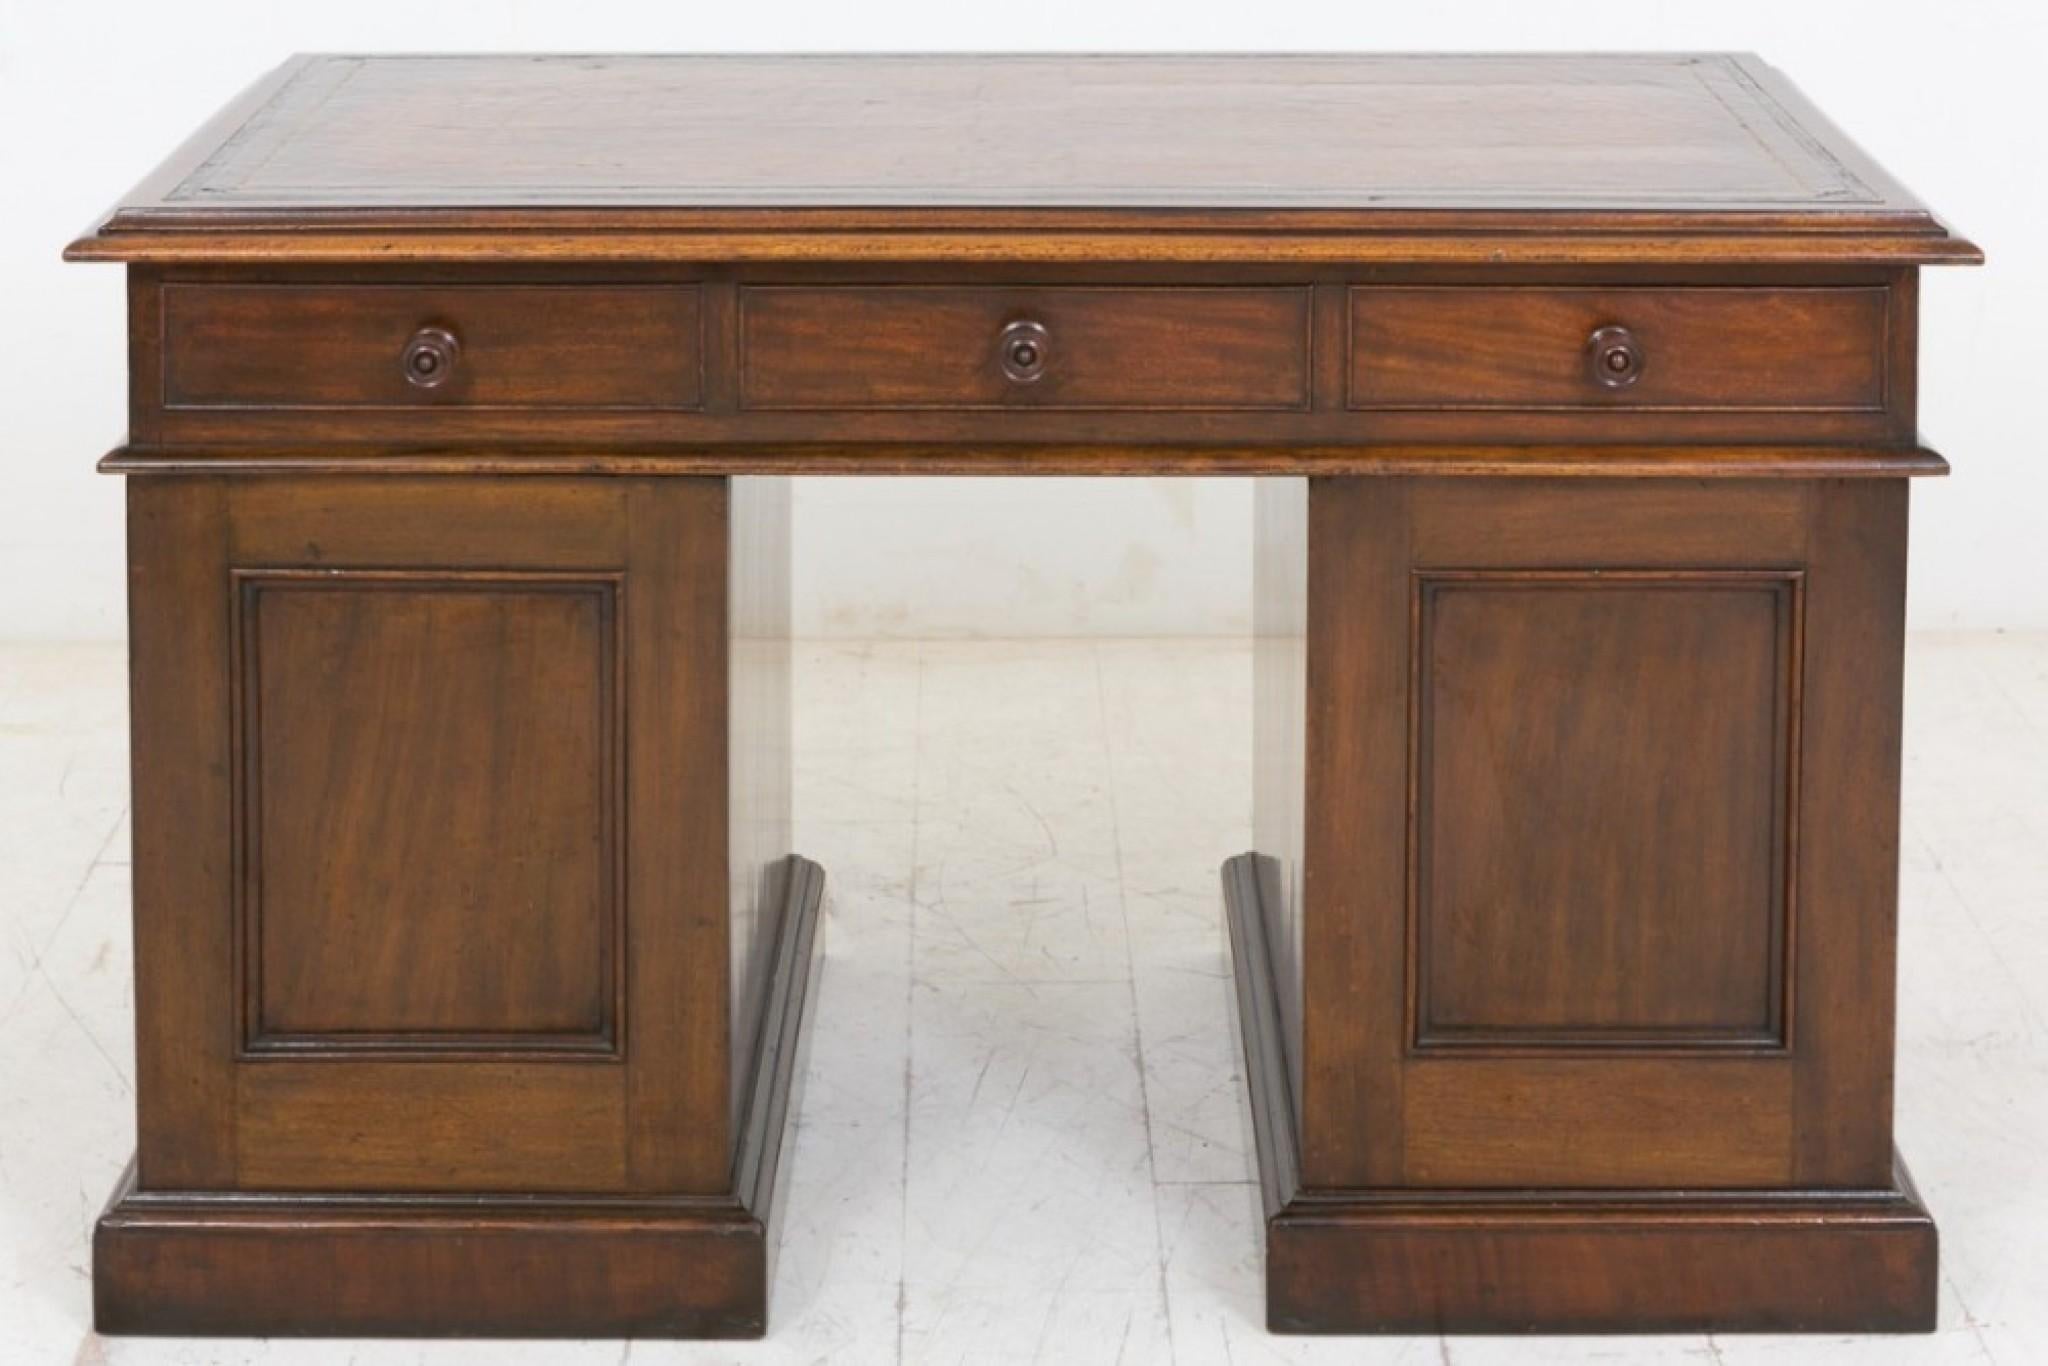 Victorian Pedestal Desk Antique Mahogany Writing Table, 1850 For Sale 5